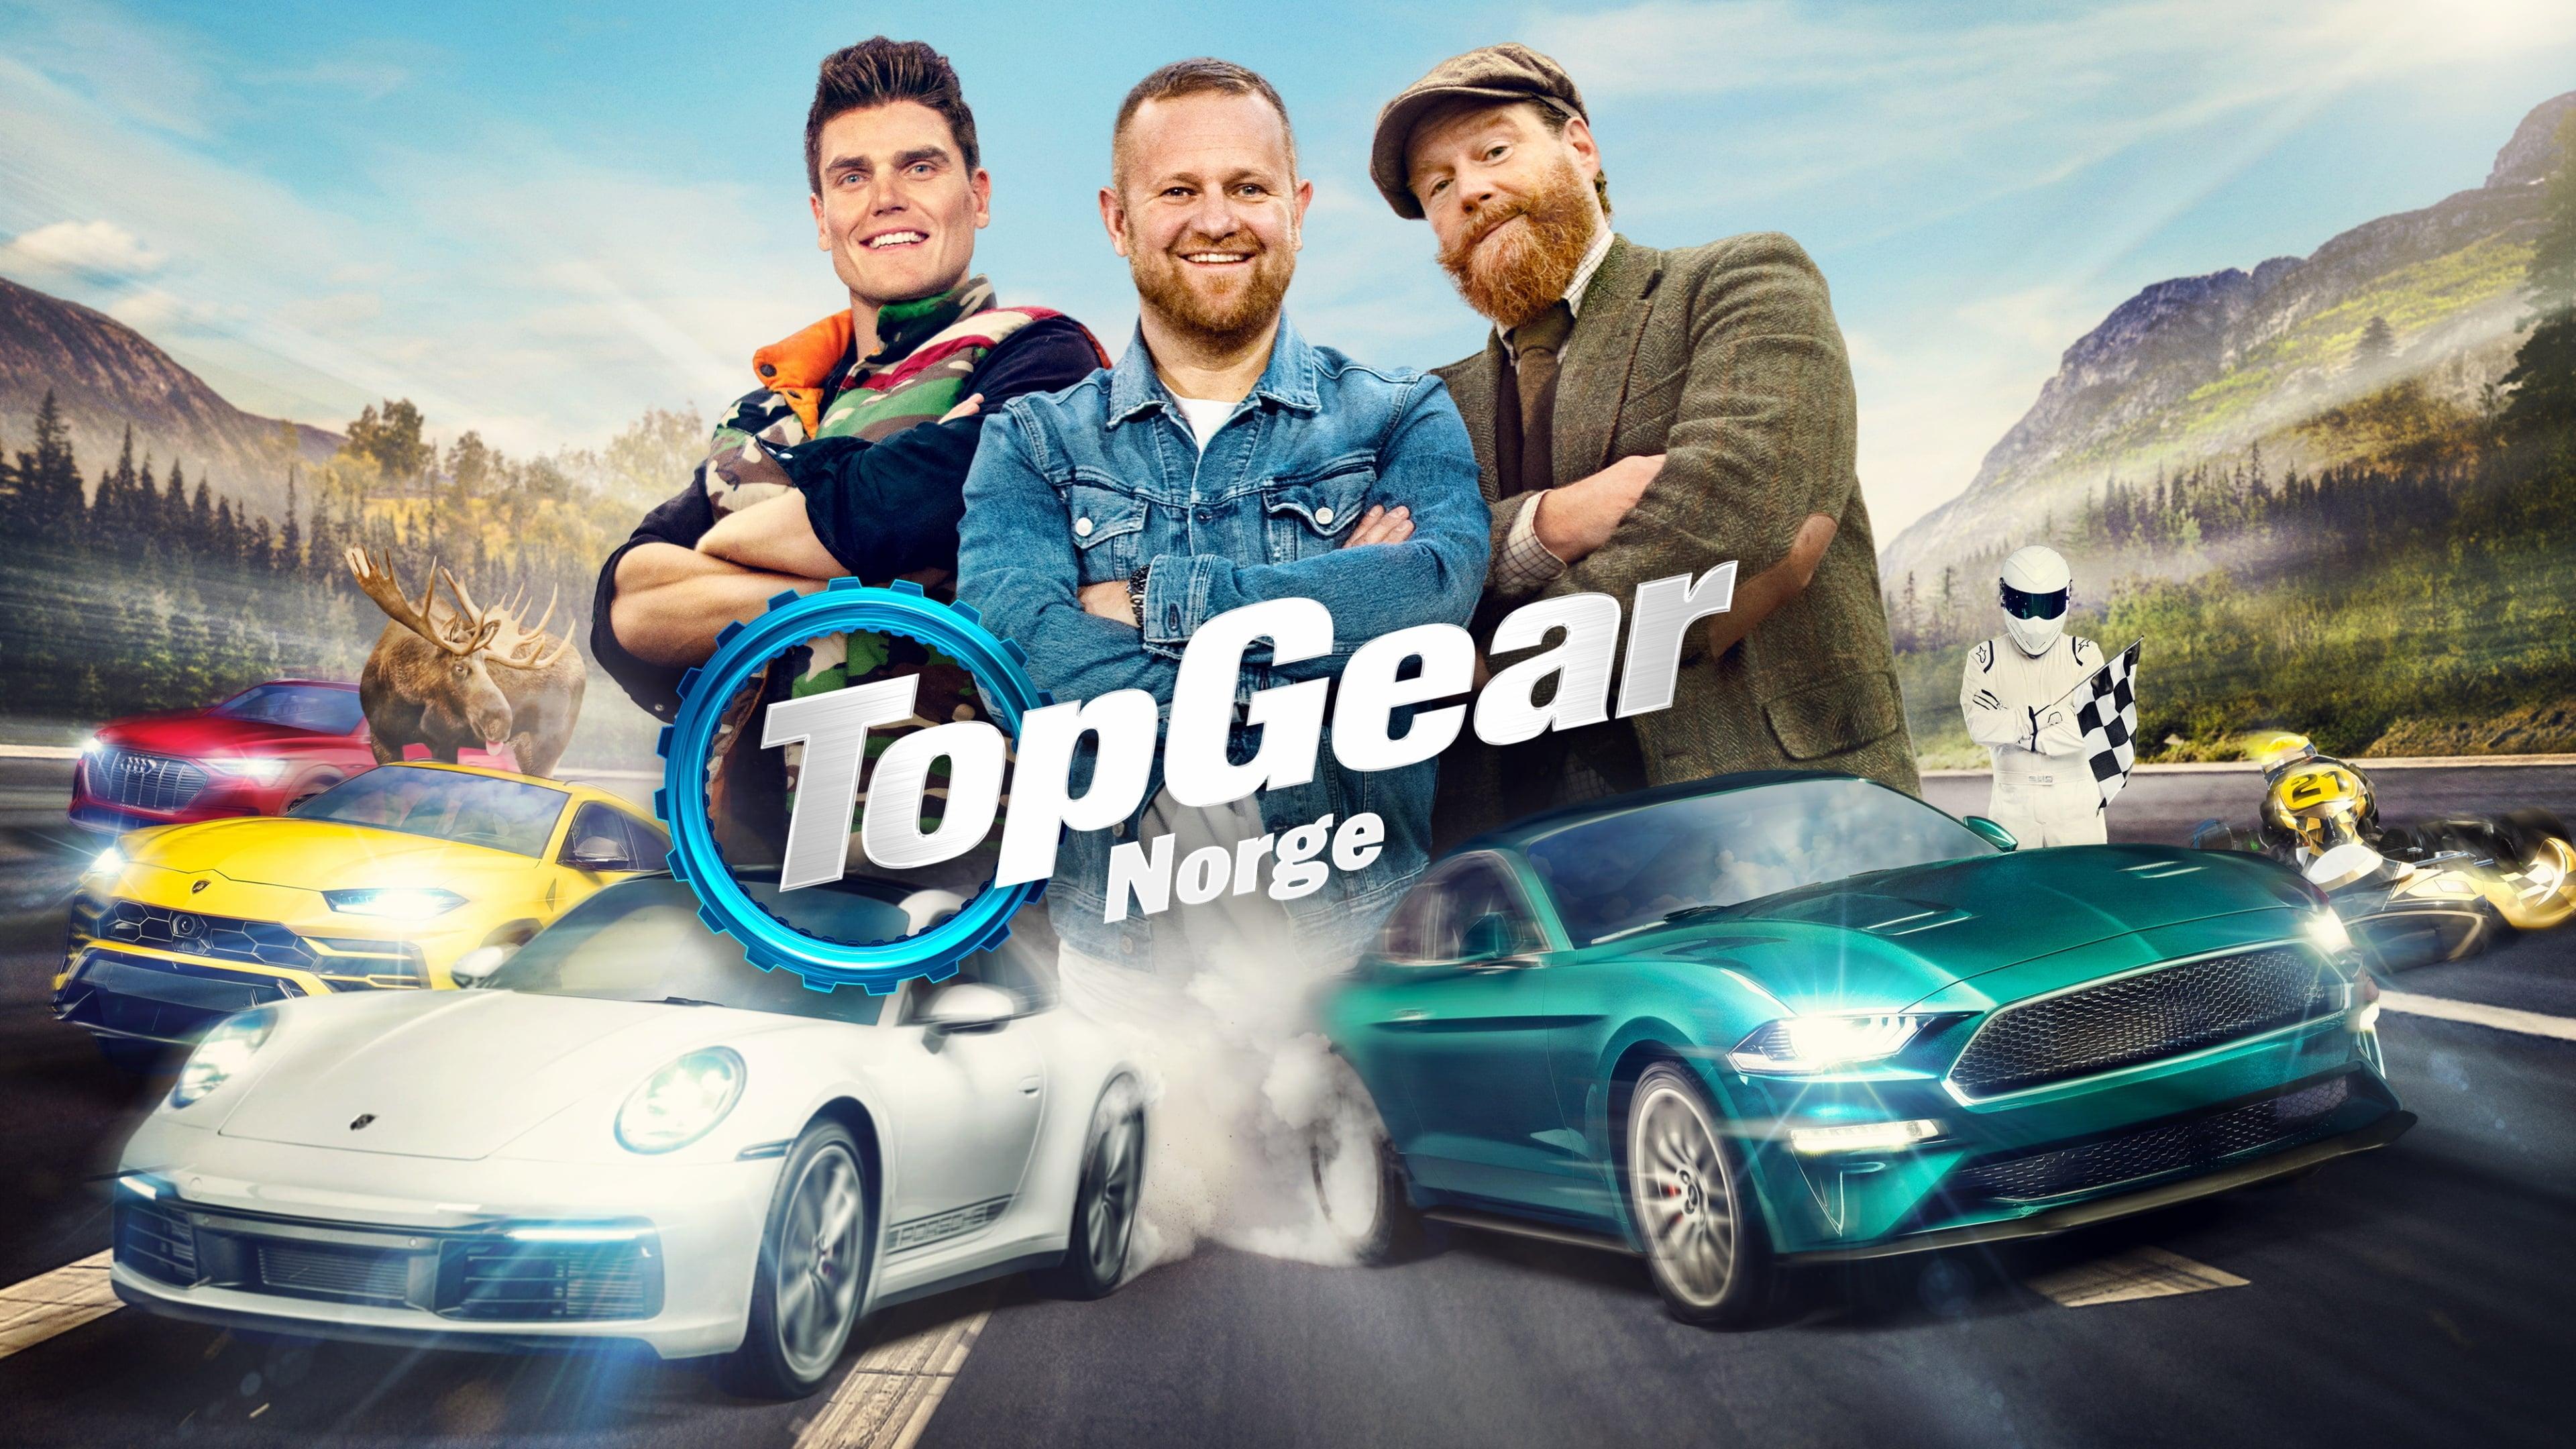 Top Gear Norge backdrop